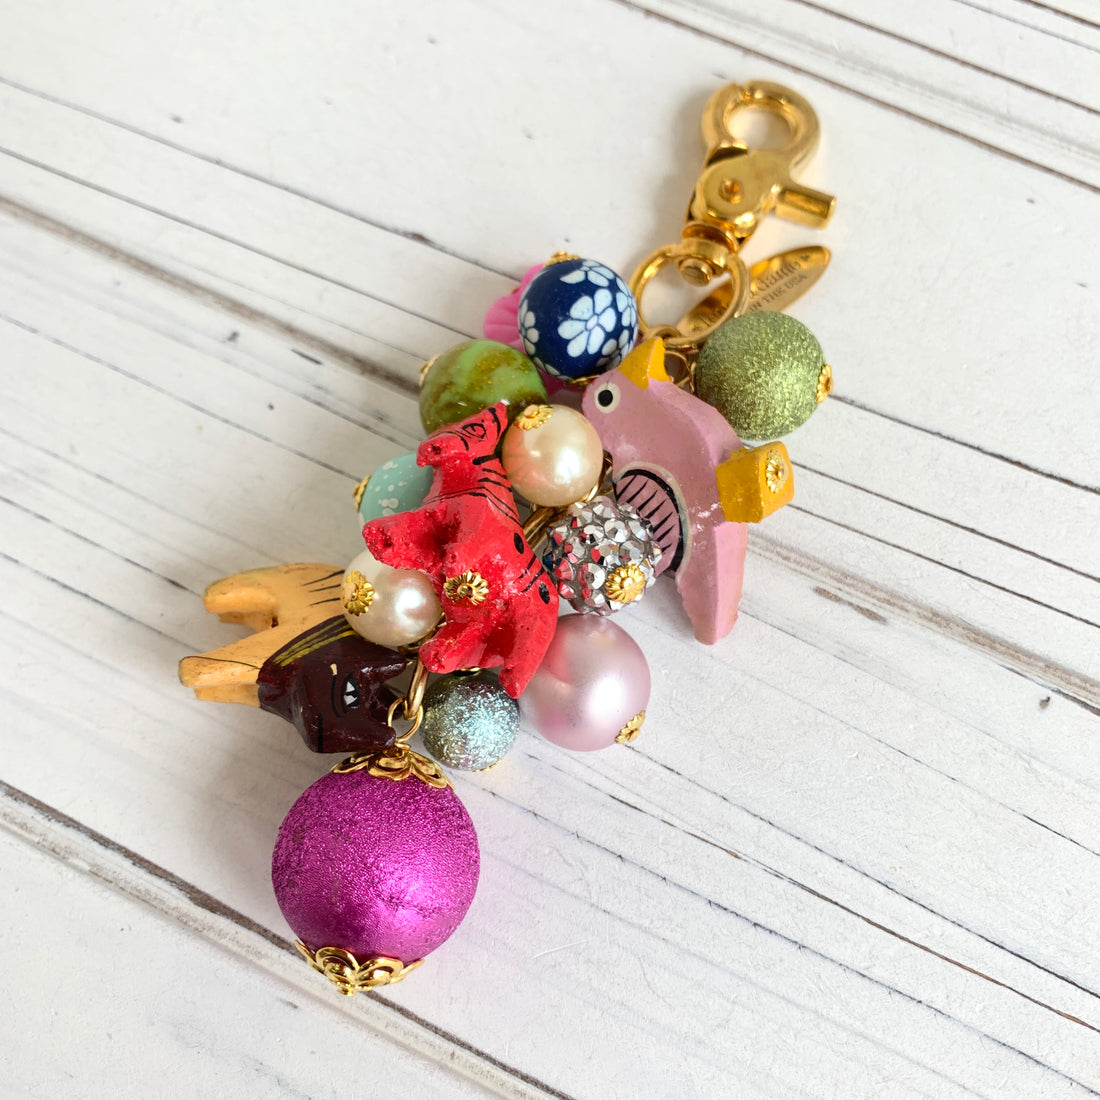 Cards and Crafts : DIY Handmade Bag Charms